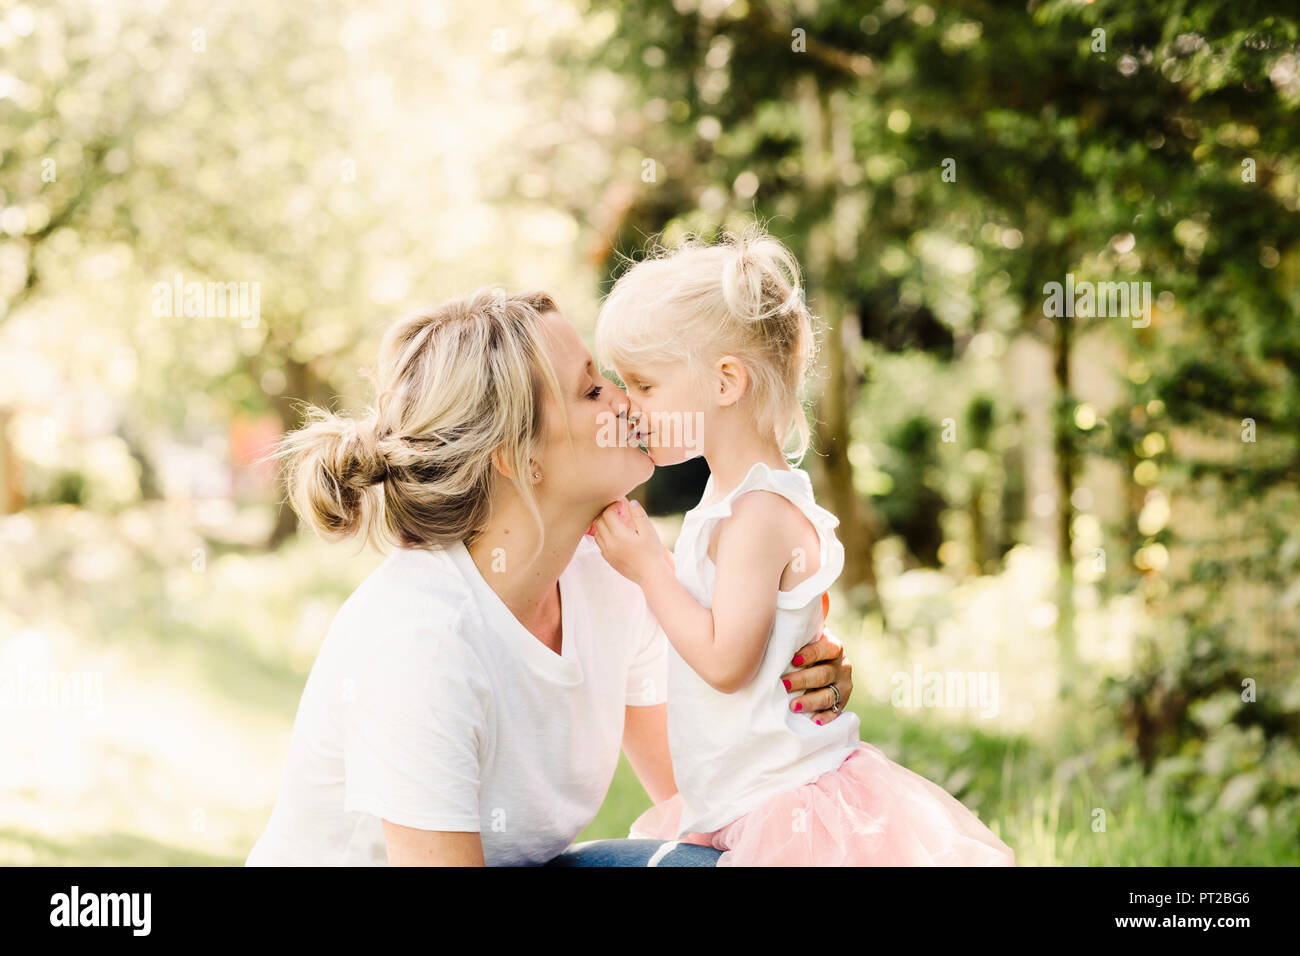 Happy mother kissing her little daughter outdoors Stock Photo